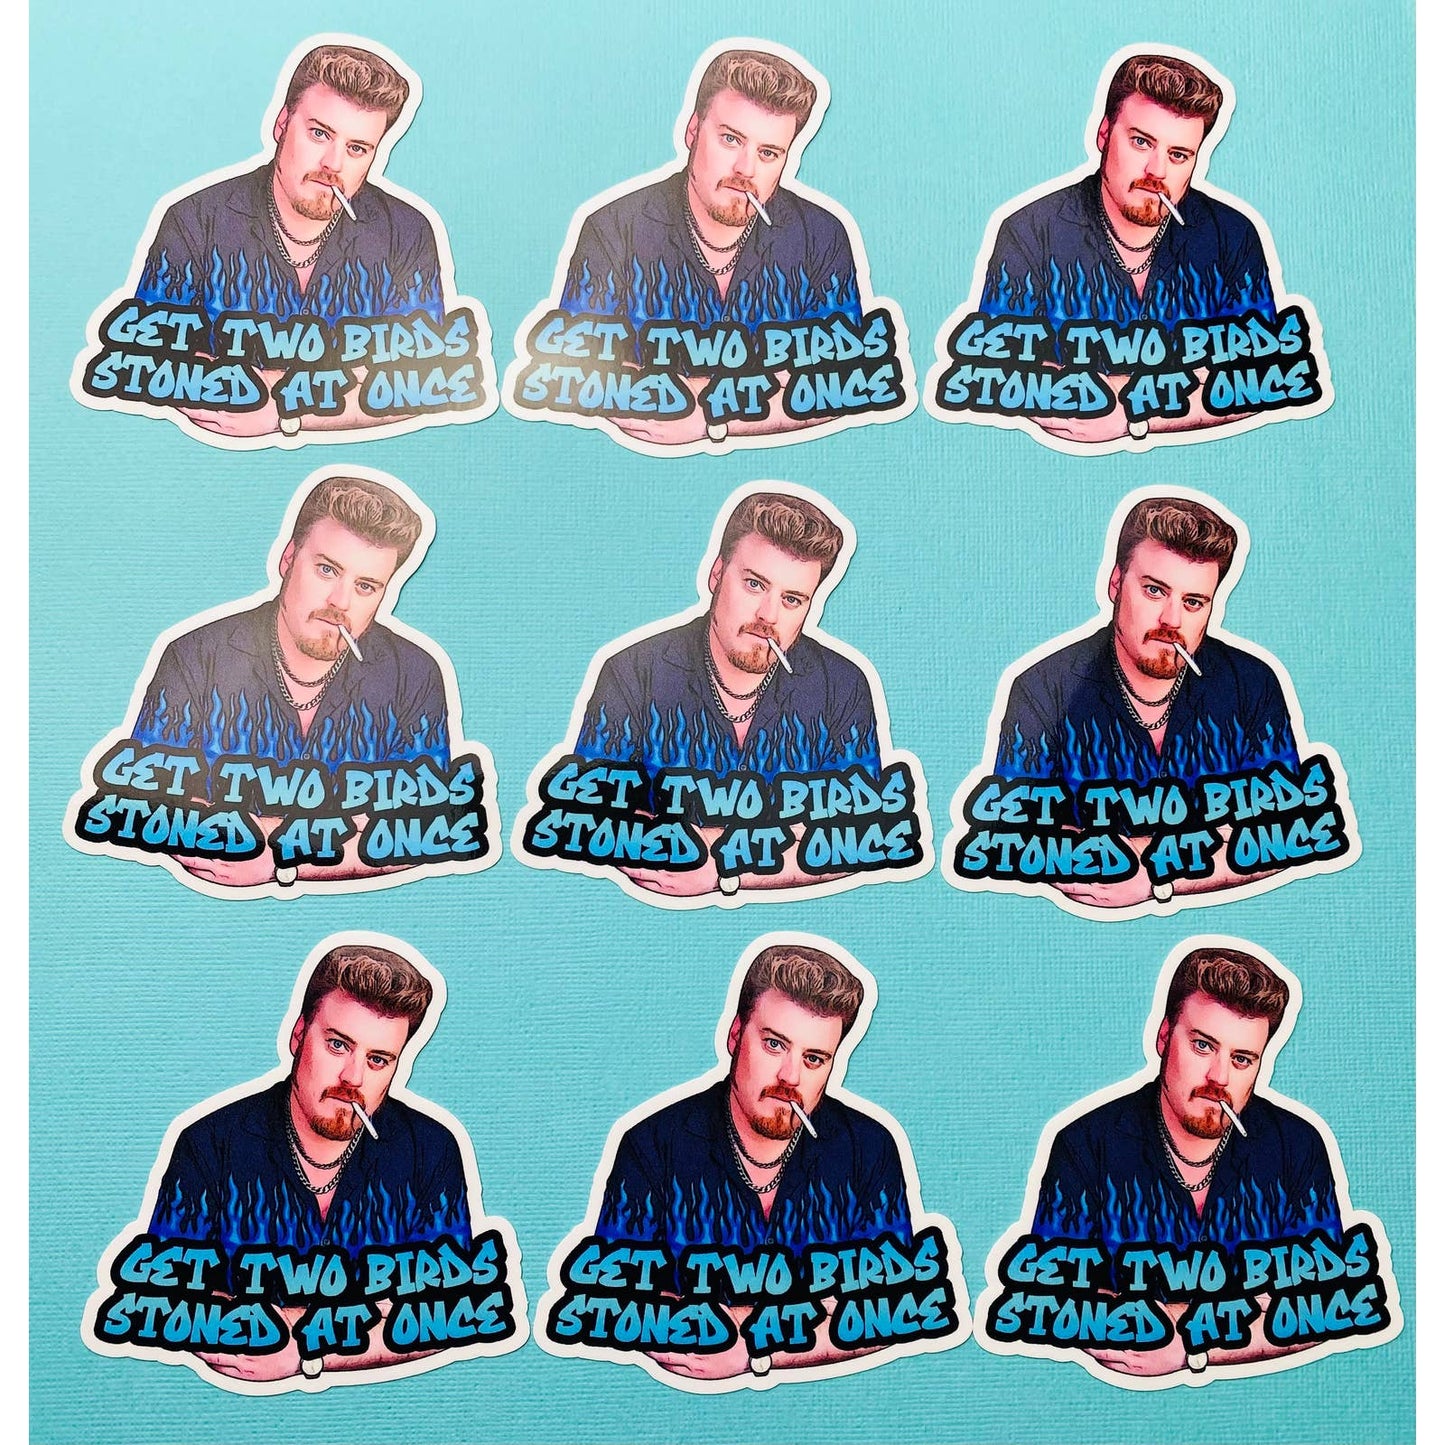 Trailer Park Boys Ricky Sticker | Get Two Birds Stoned At Once | Officially Licensed Trailer Park Boys Sticker |